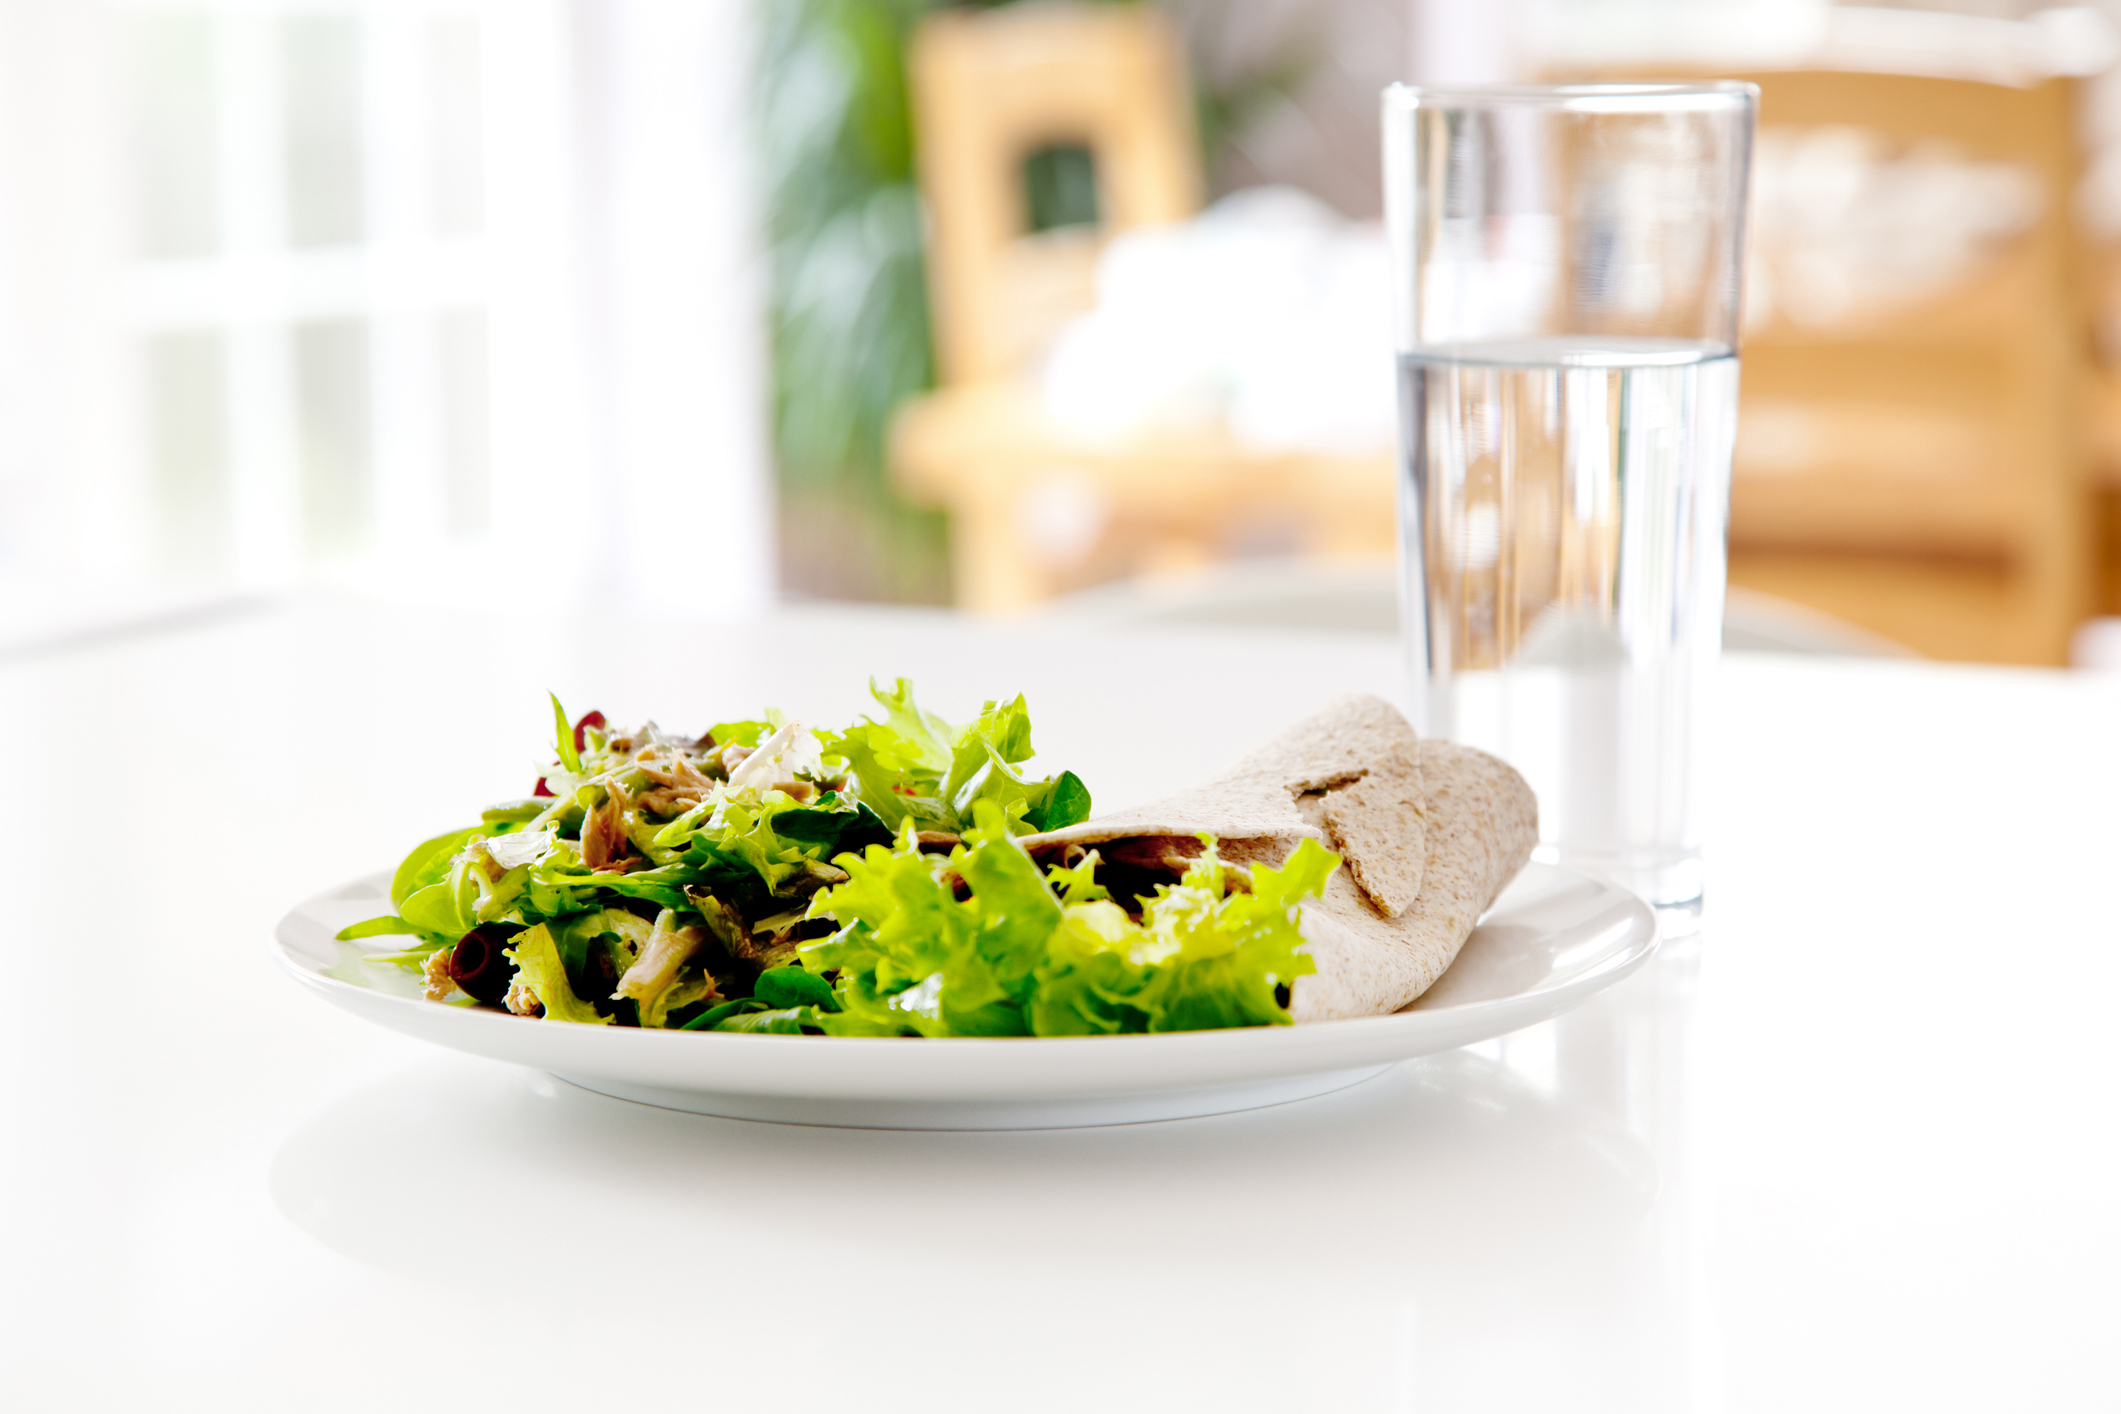 Salad plate with bread beside a glass of water on a table, implying a healthy meal for two